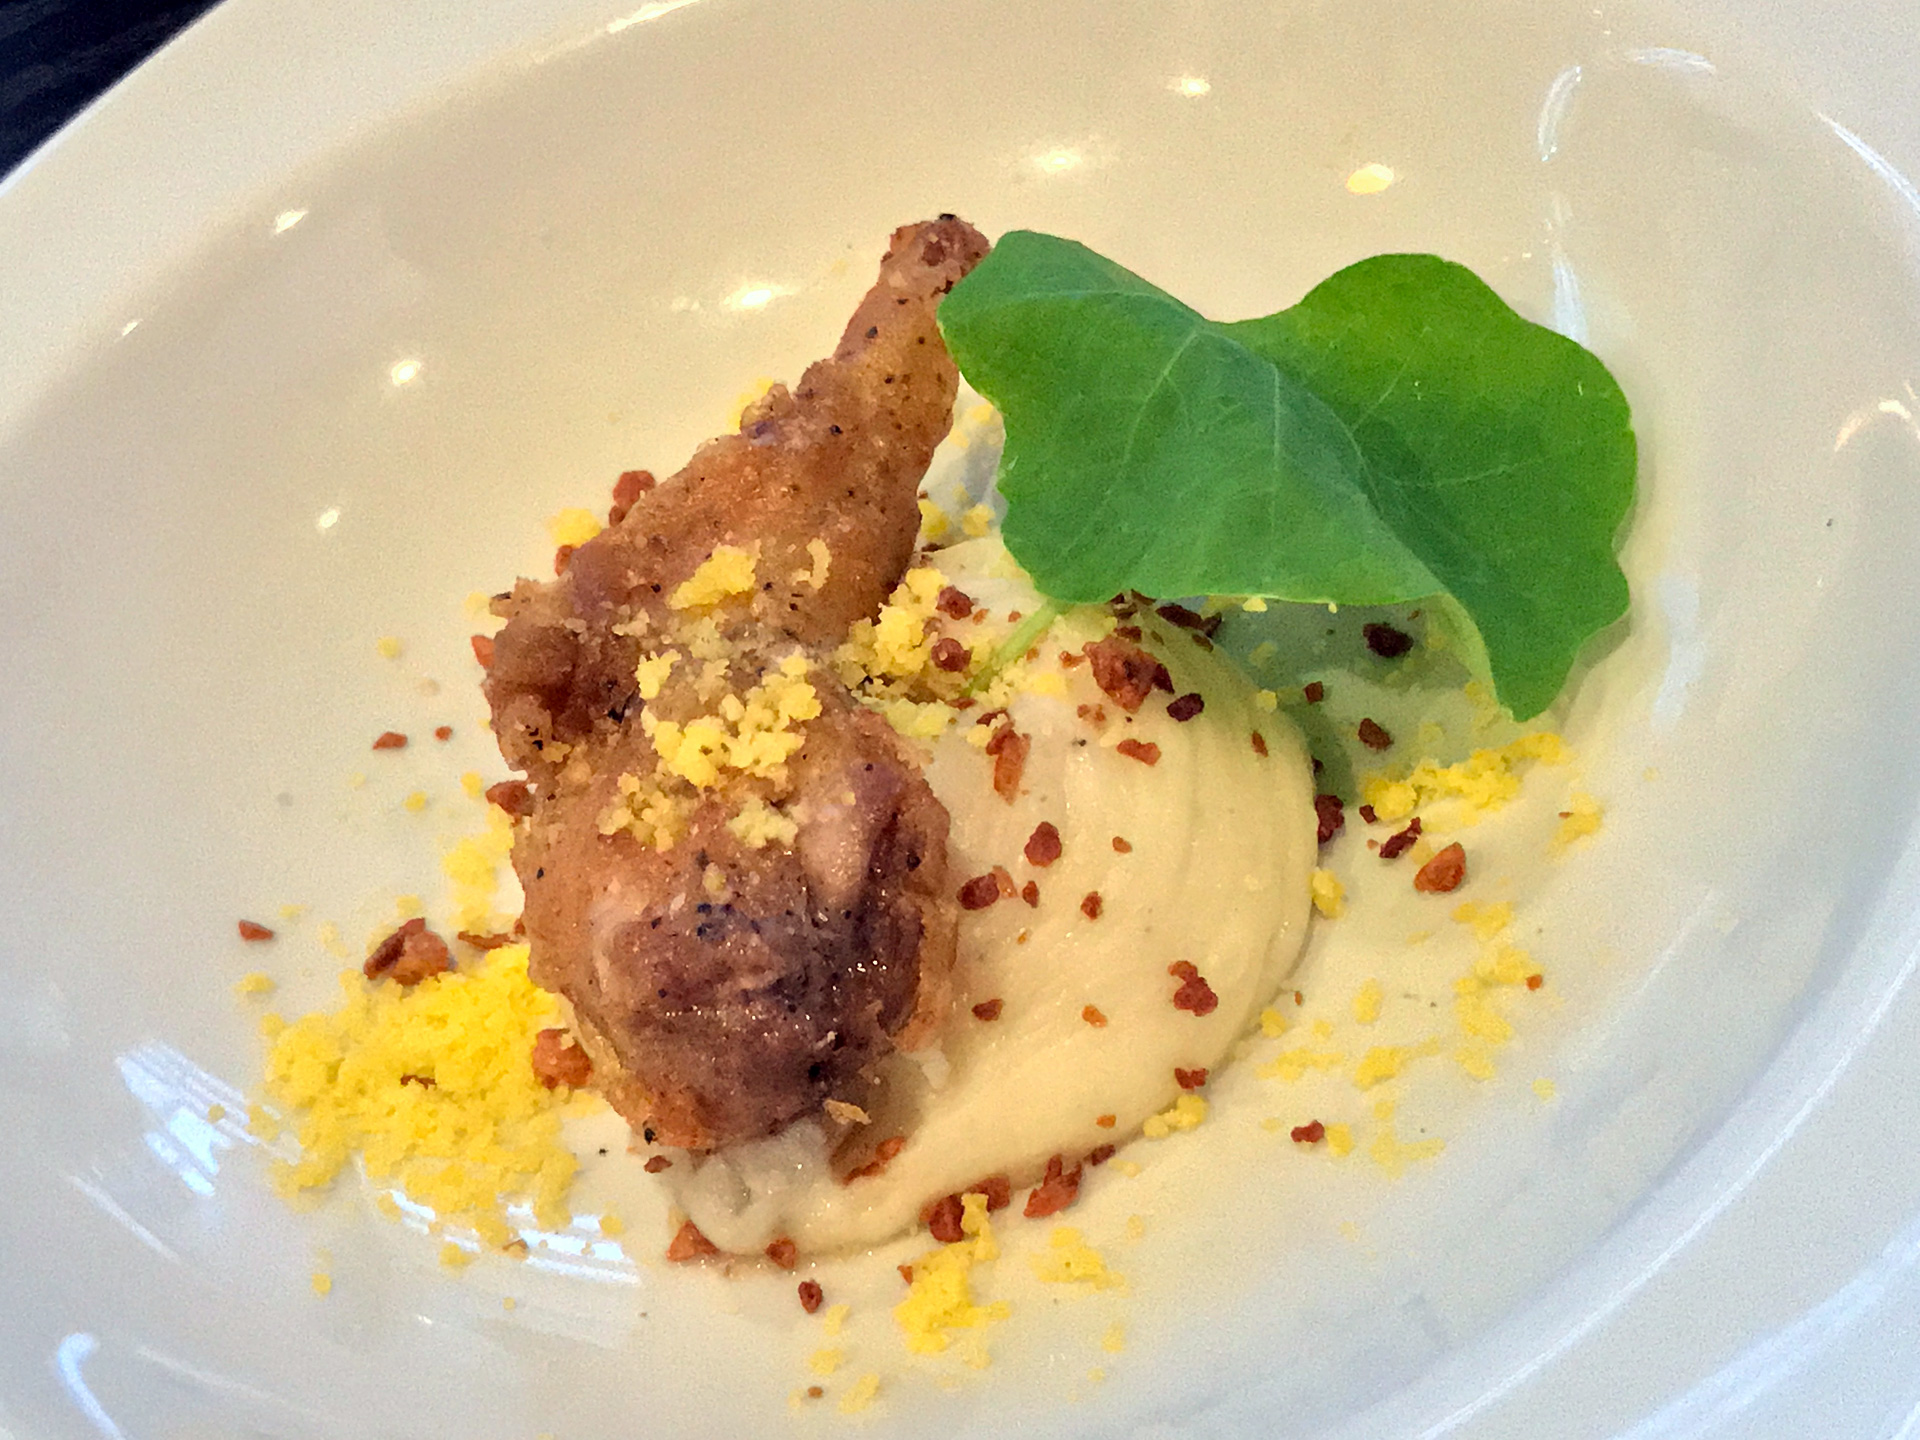 Crispy quail with roasted garlic, salted egg and mashed cassava.